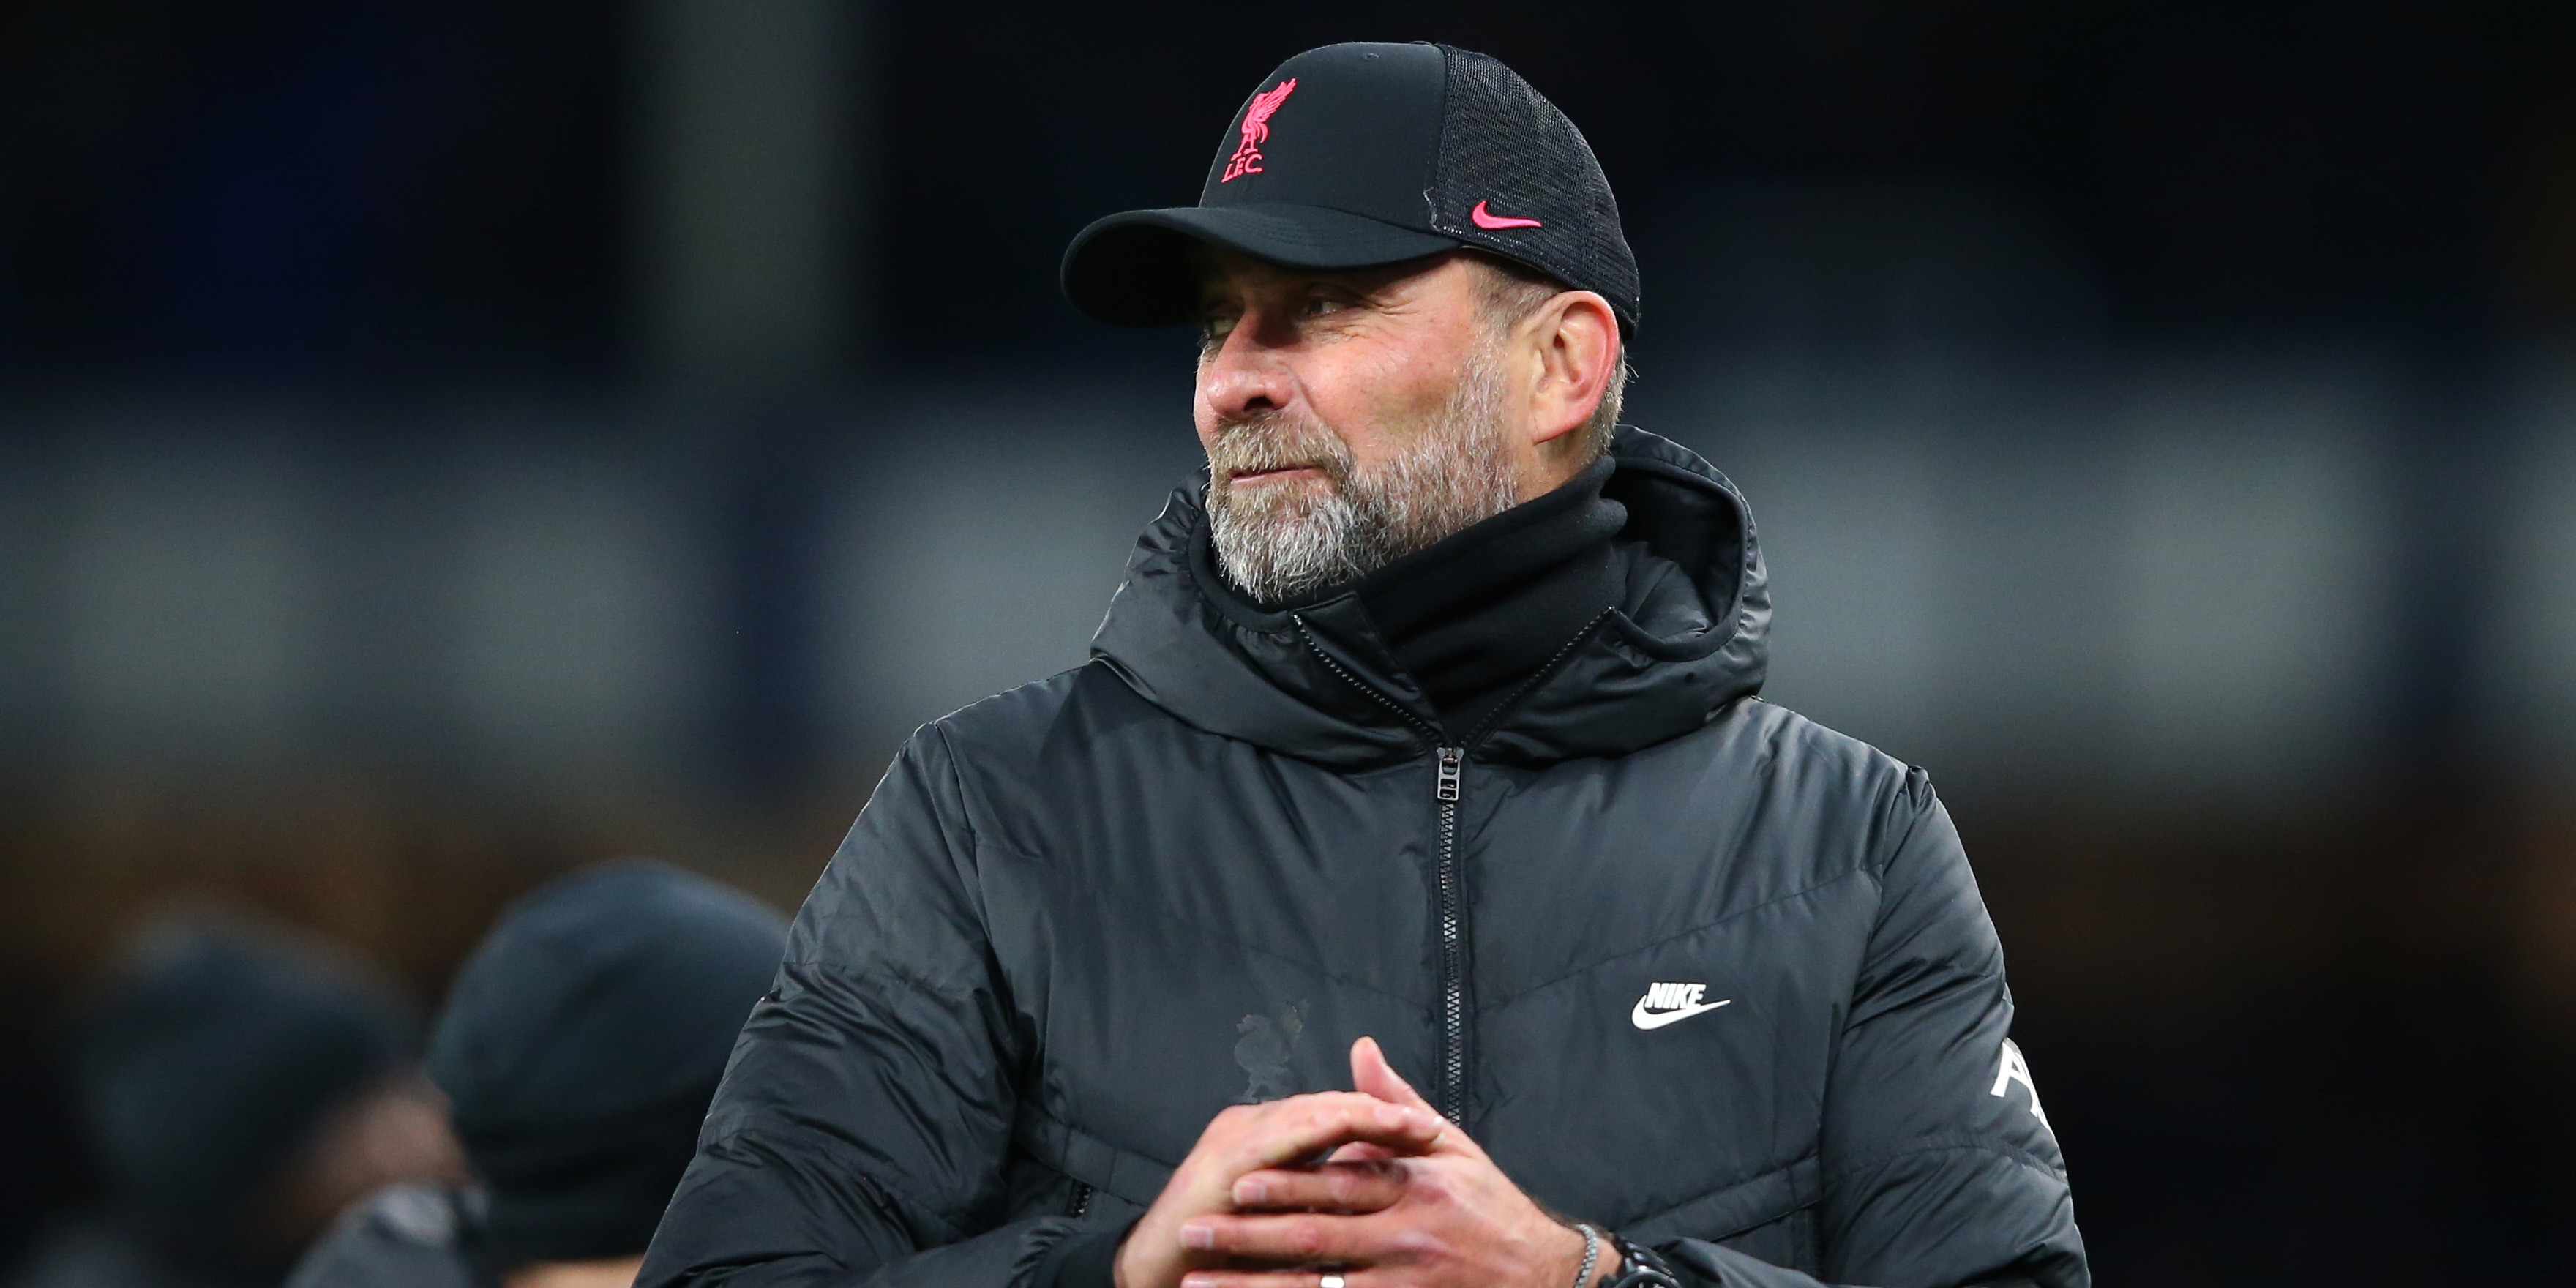 ‘He will be a Liverpool player in the future’ – Jurgen Klopp makes claim about youngster following EFL Cup victory